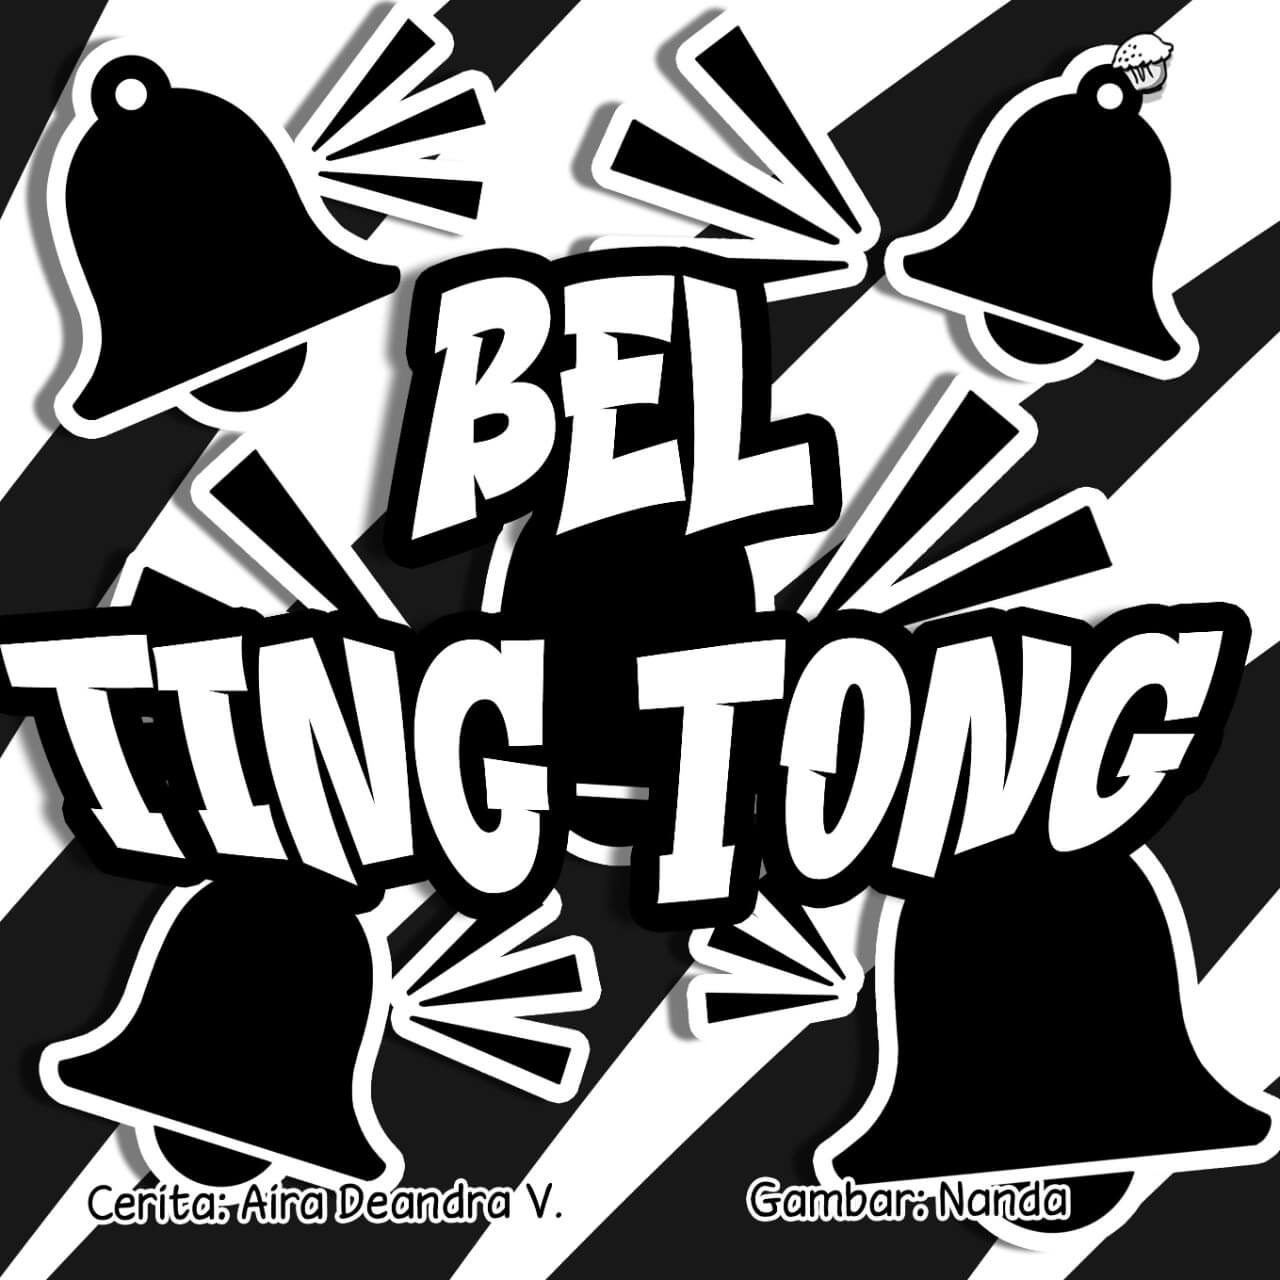 bel ting tong cover bw